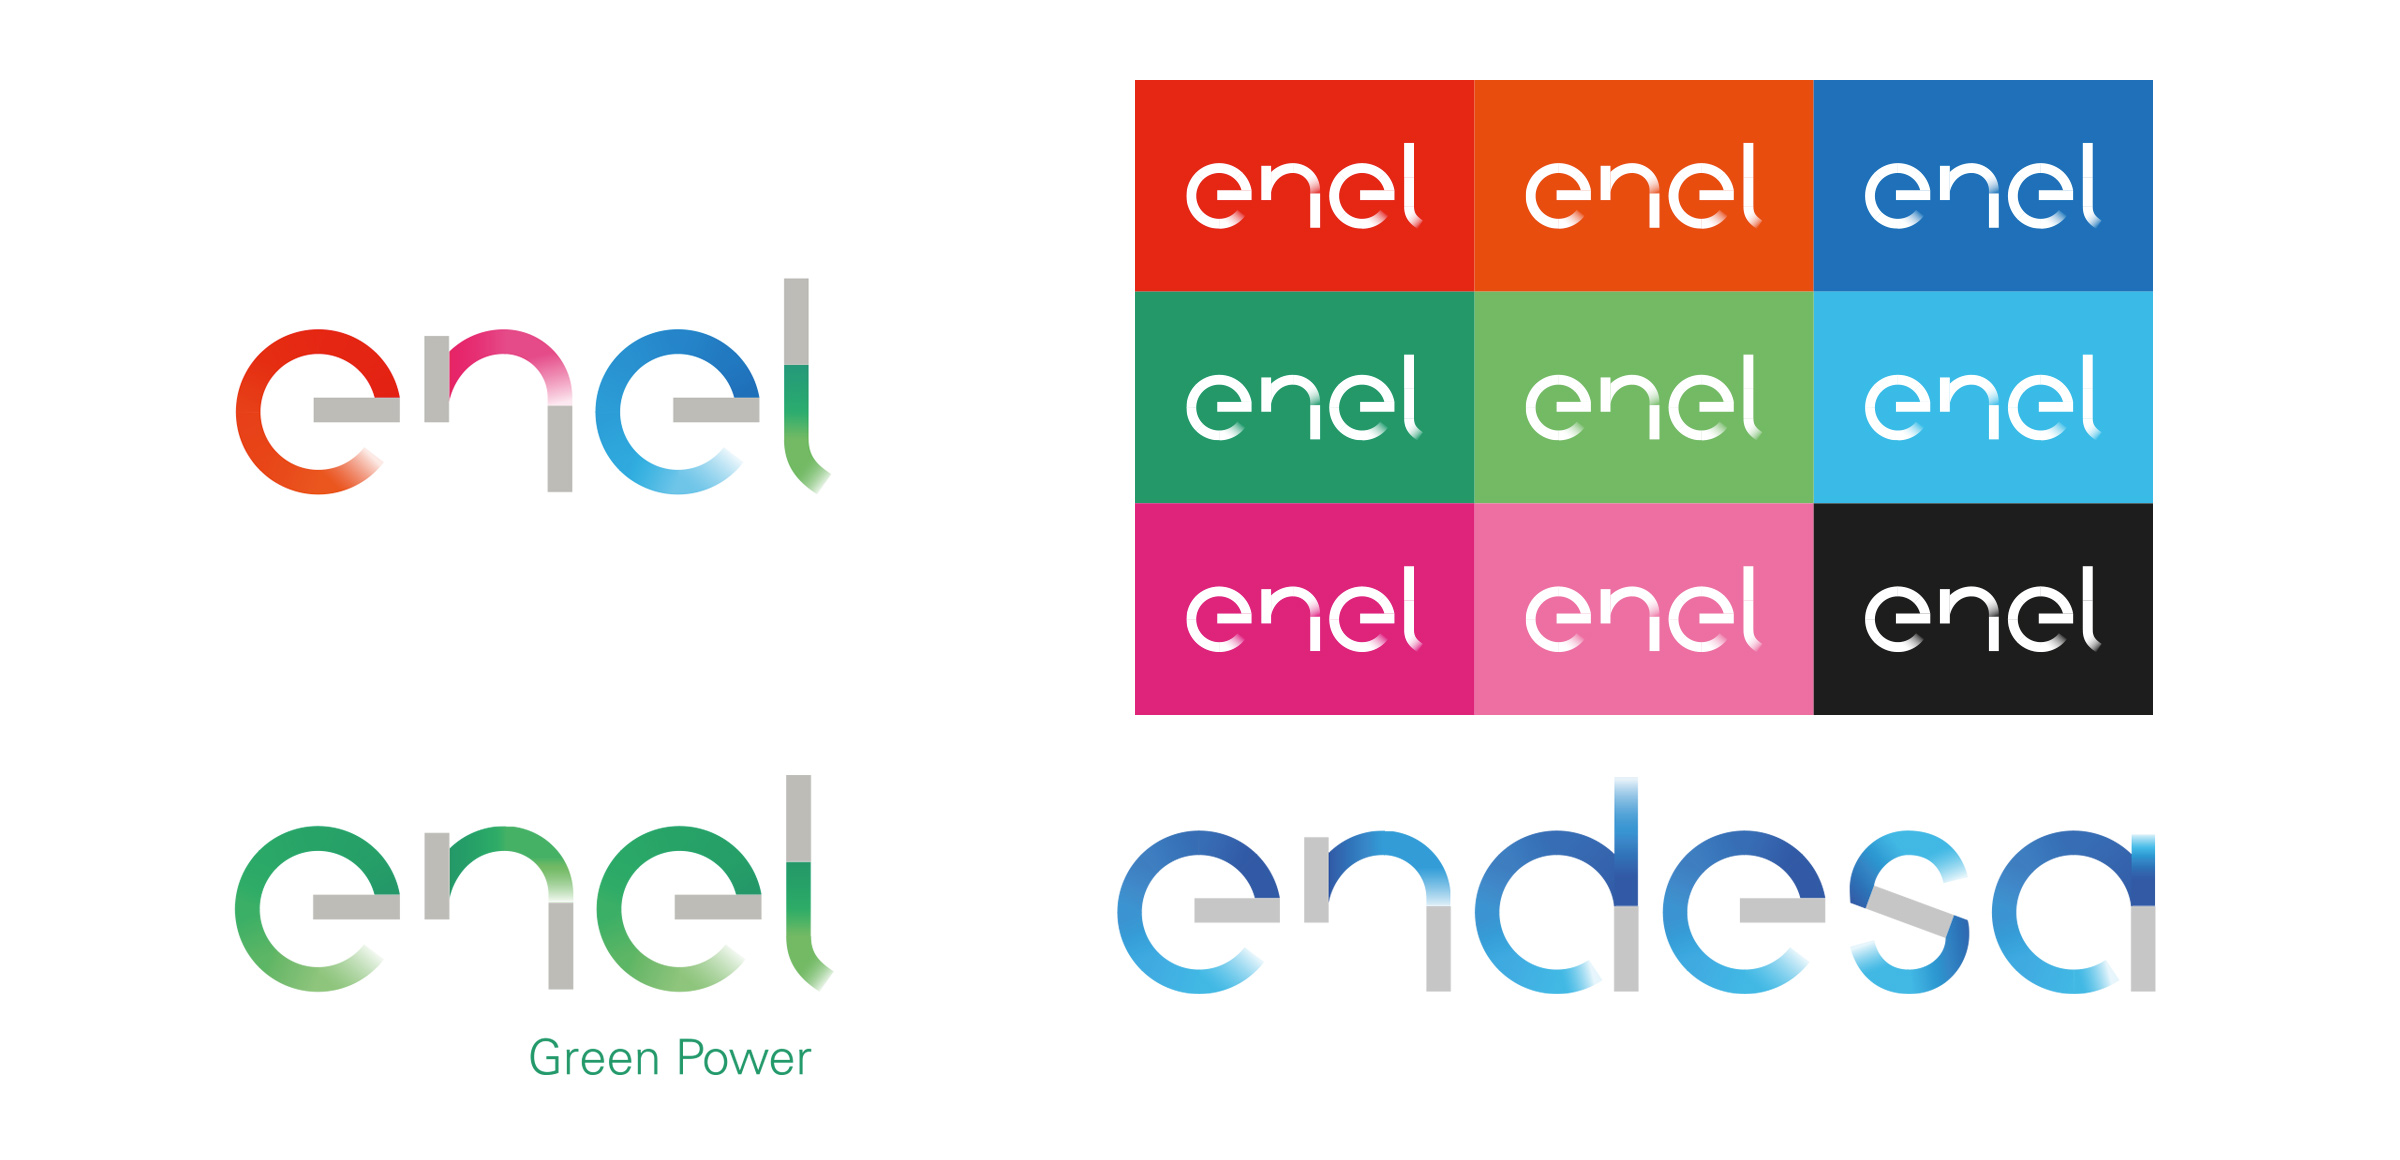 In line with Enel's new vision of Open Power, the logo and website